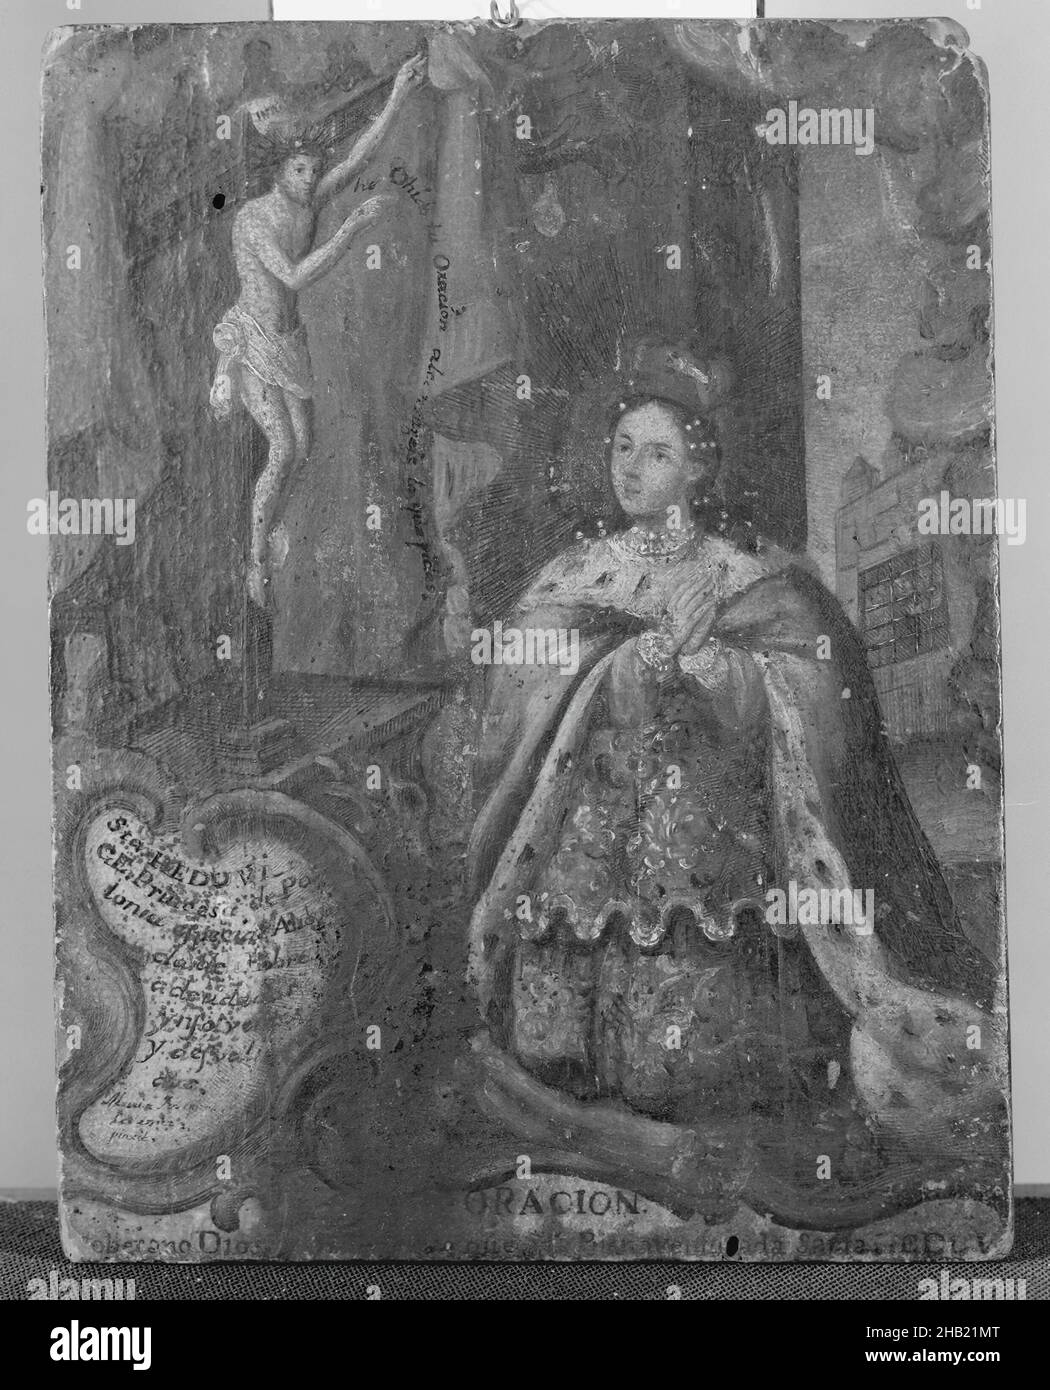 Queen Kneeling Before Cross, Painting on wood, late 18th-early 19th century, 7 11/16 x 5 15/16 in., 19.5 x 15.1 cm, Christ, cross, crucifiction, crucifix, ermine, female, holy, humble, Jesus, kneeling figure, monarch, painting, prayer, praying, queen, religious, robe, vision, woman Stock Photo